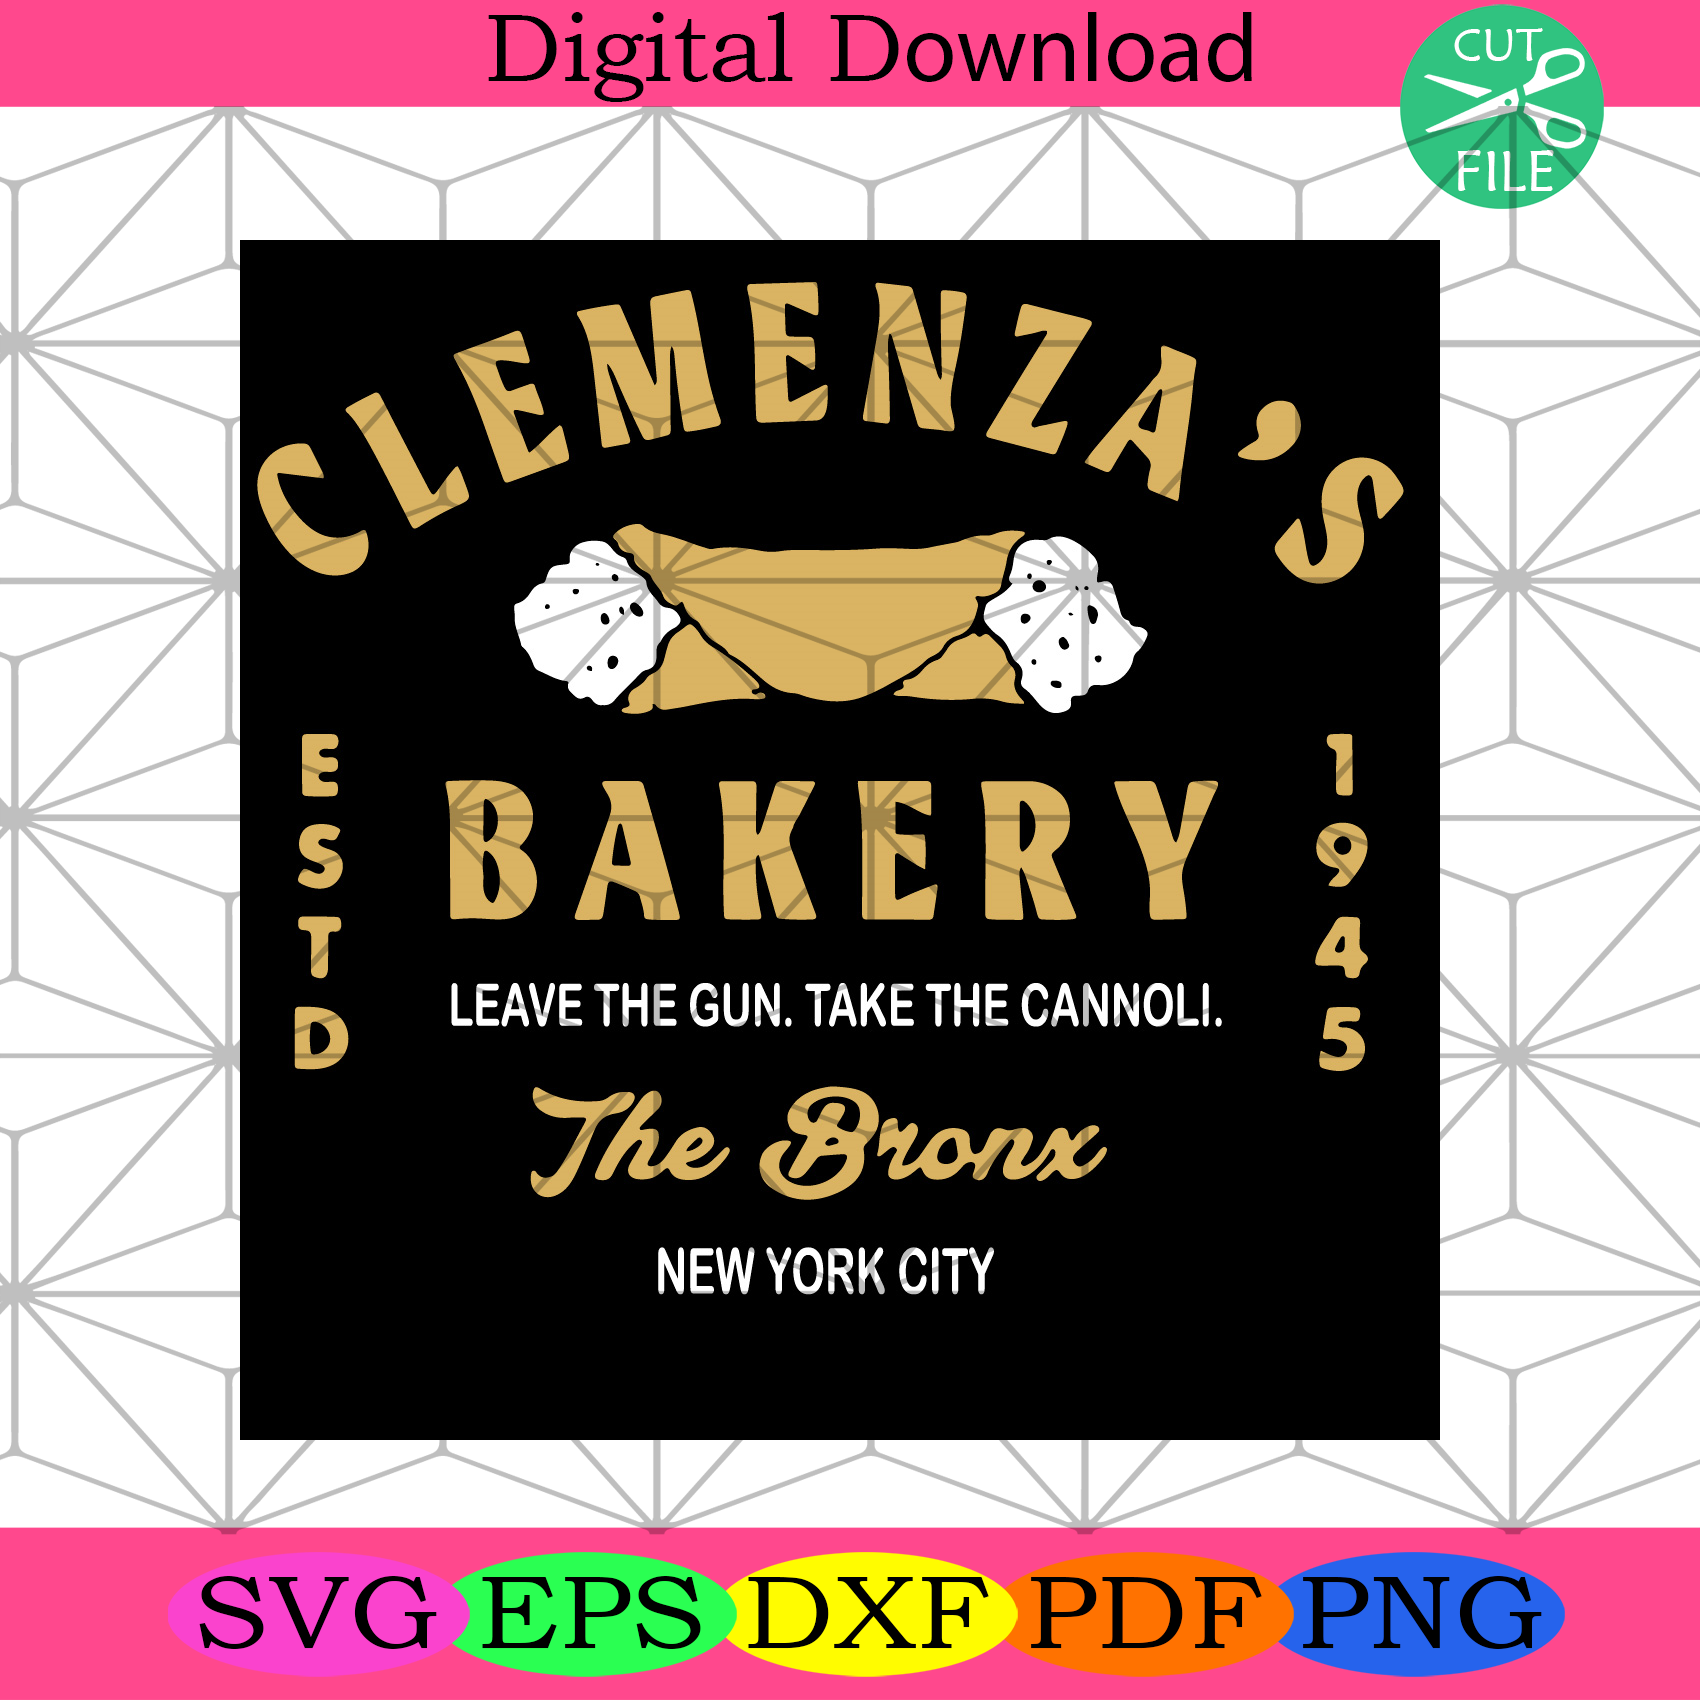 Clemenzas Bakery Leave The Gun Take The Cannoli Svg Trending Svg